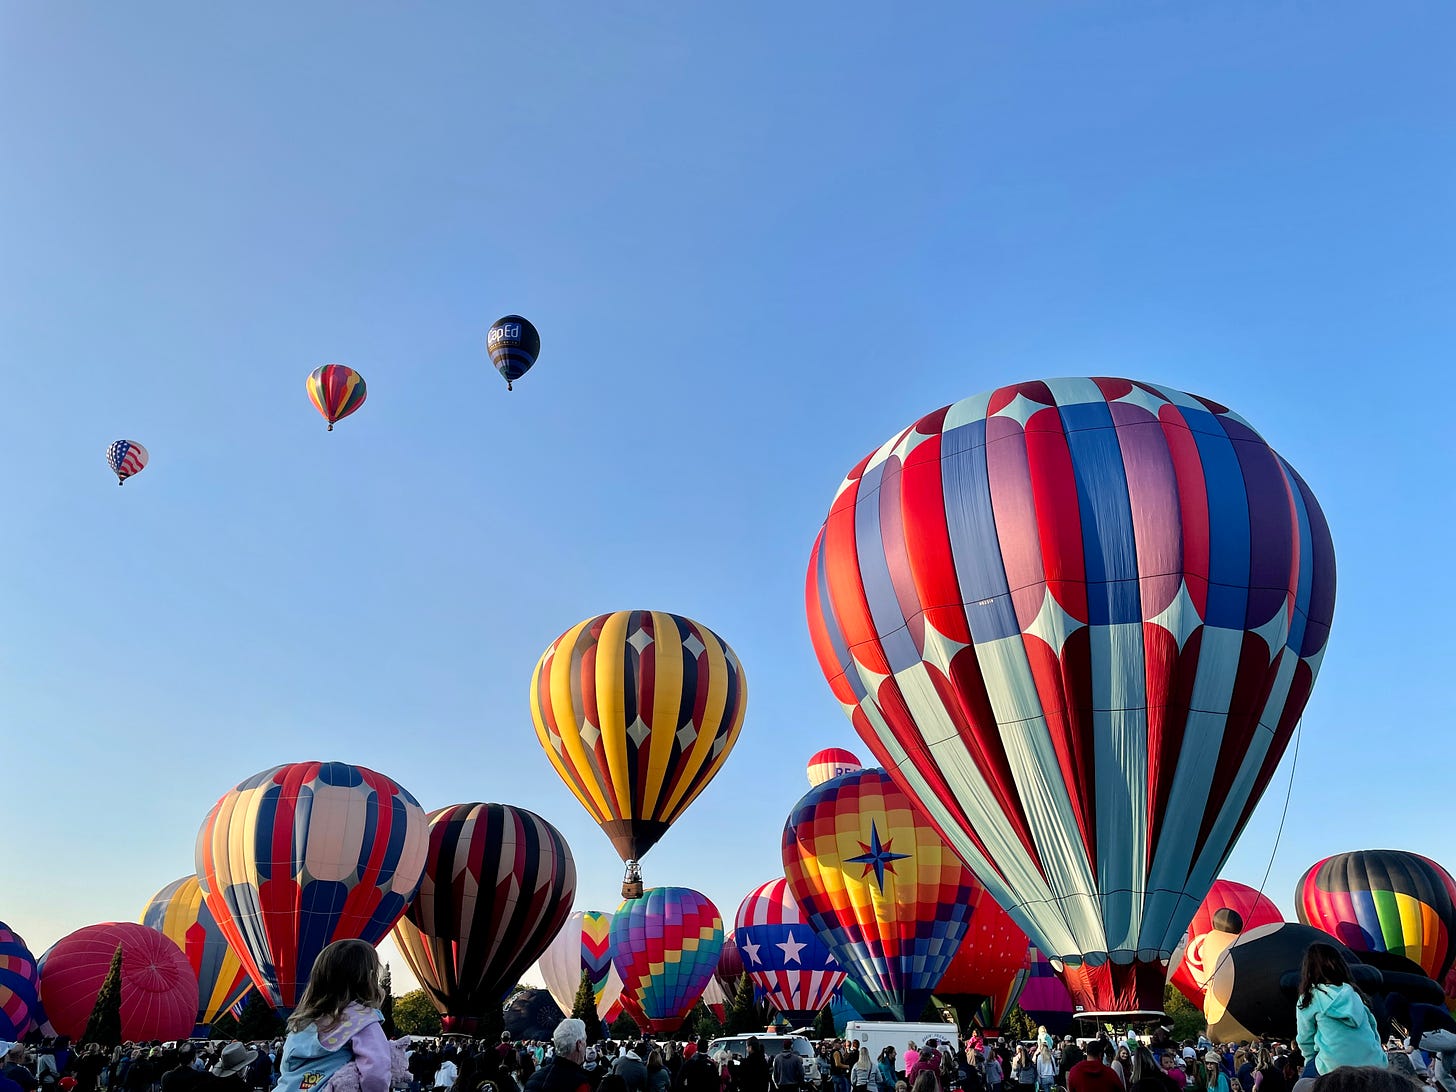 Brightly colors hot air balloons filling slowly, crowding the morning sky